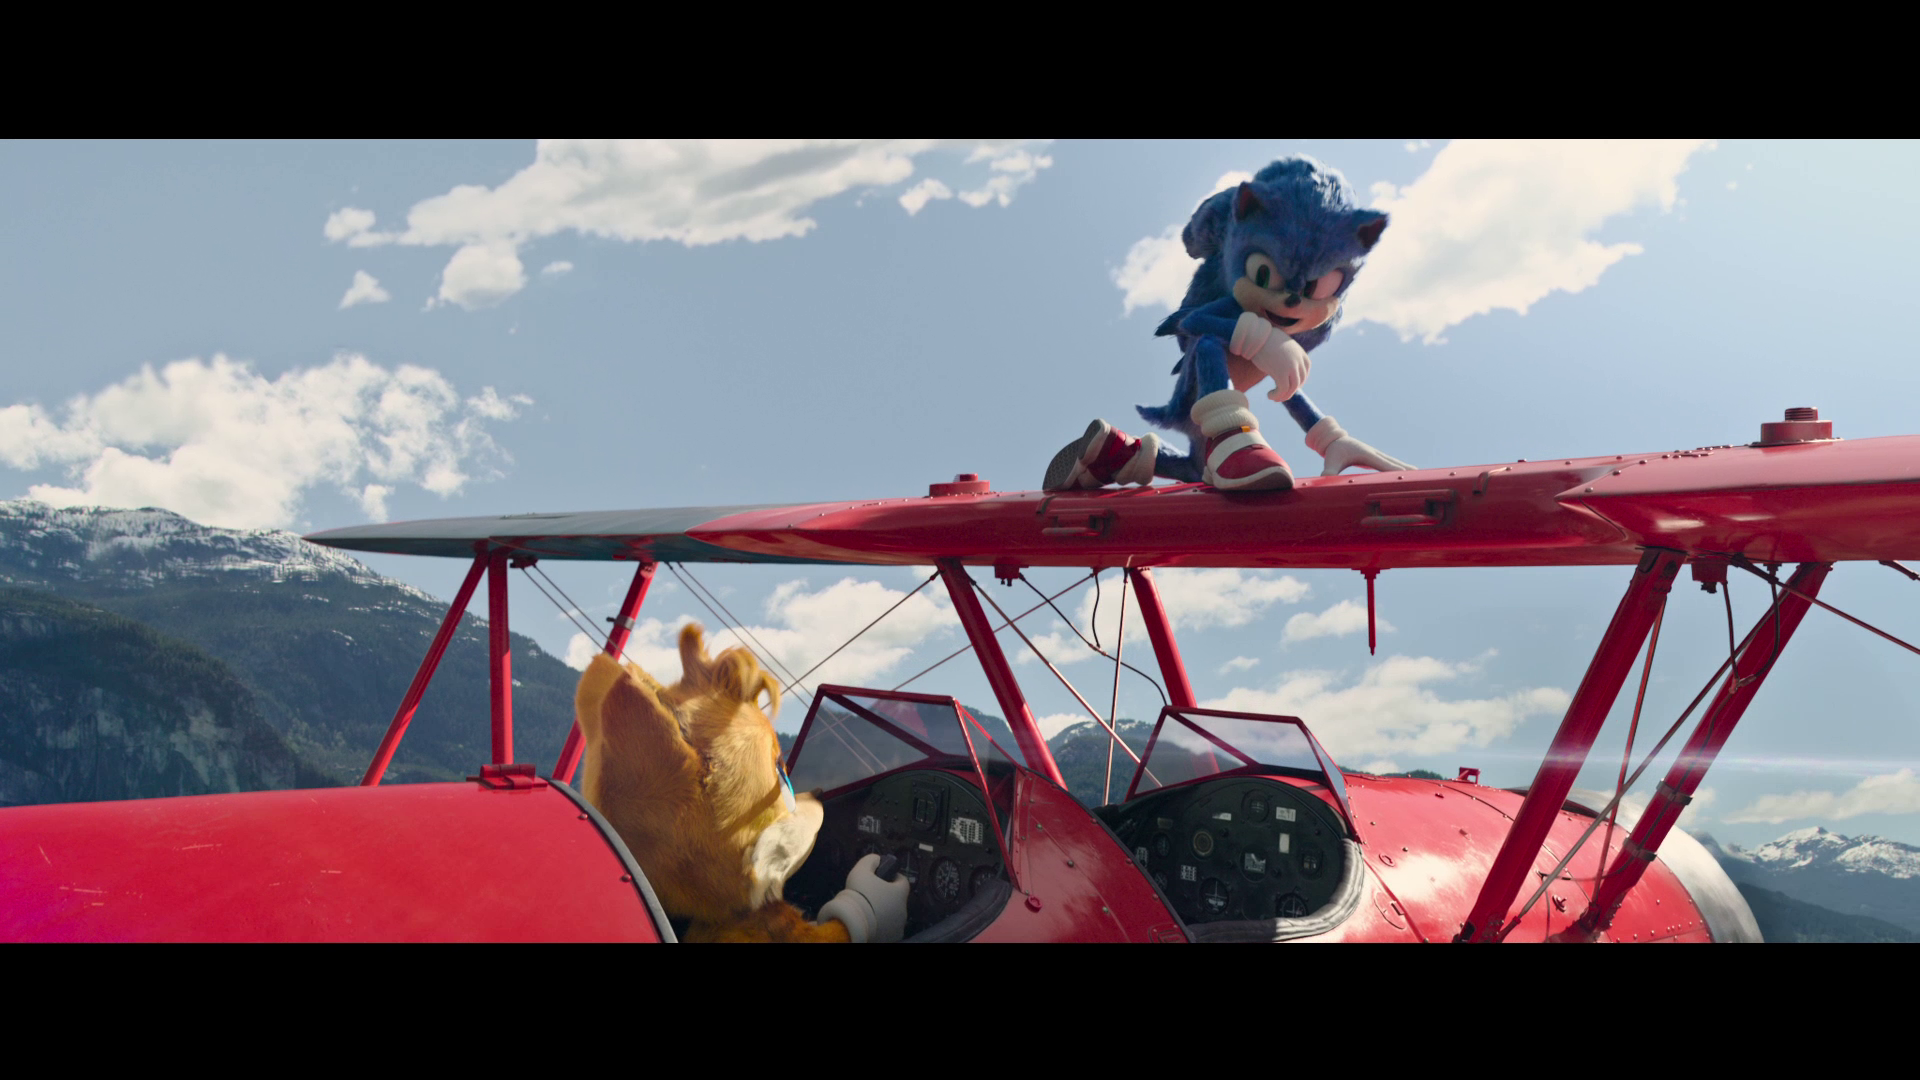 Sonic the Hedgehog 2's first trailer finally arrives